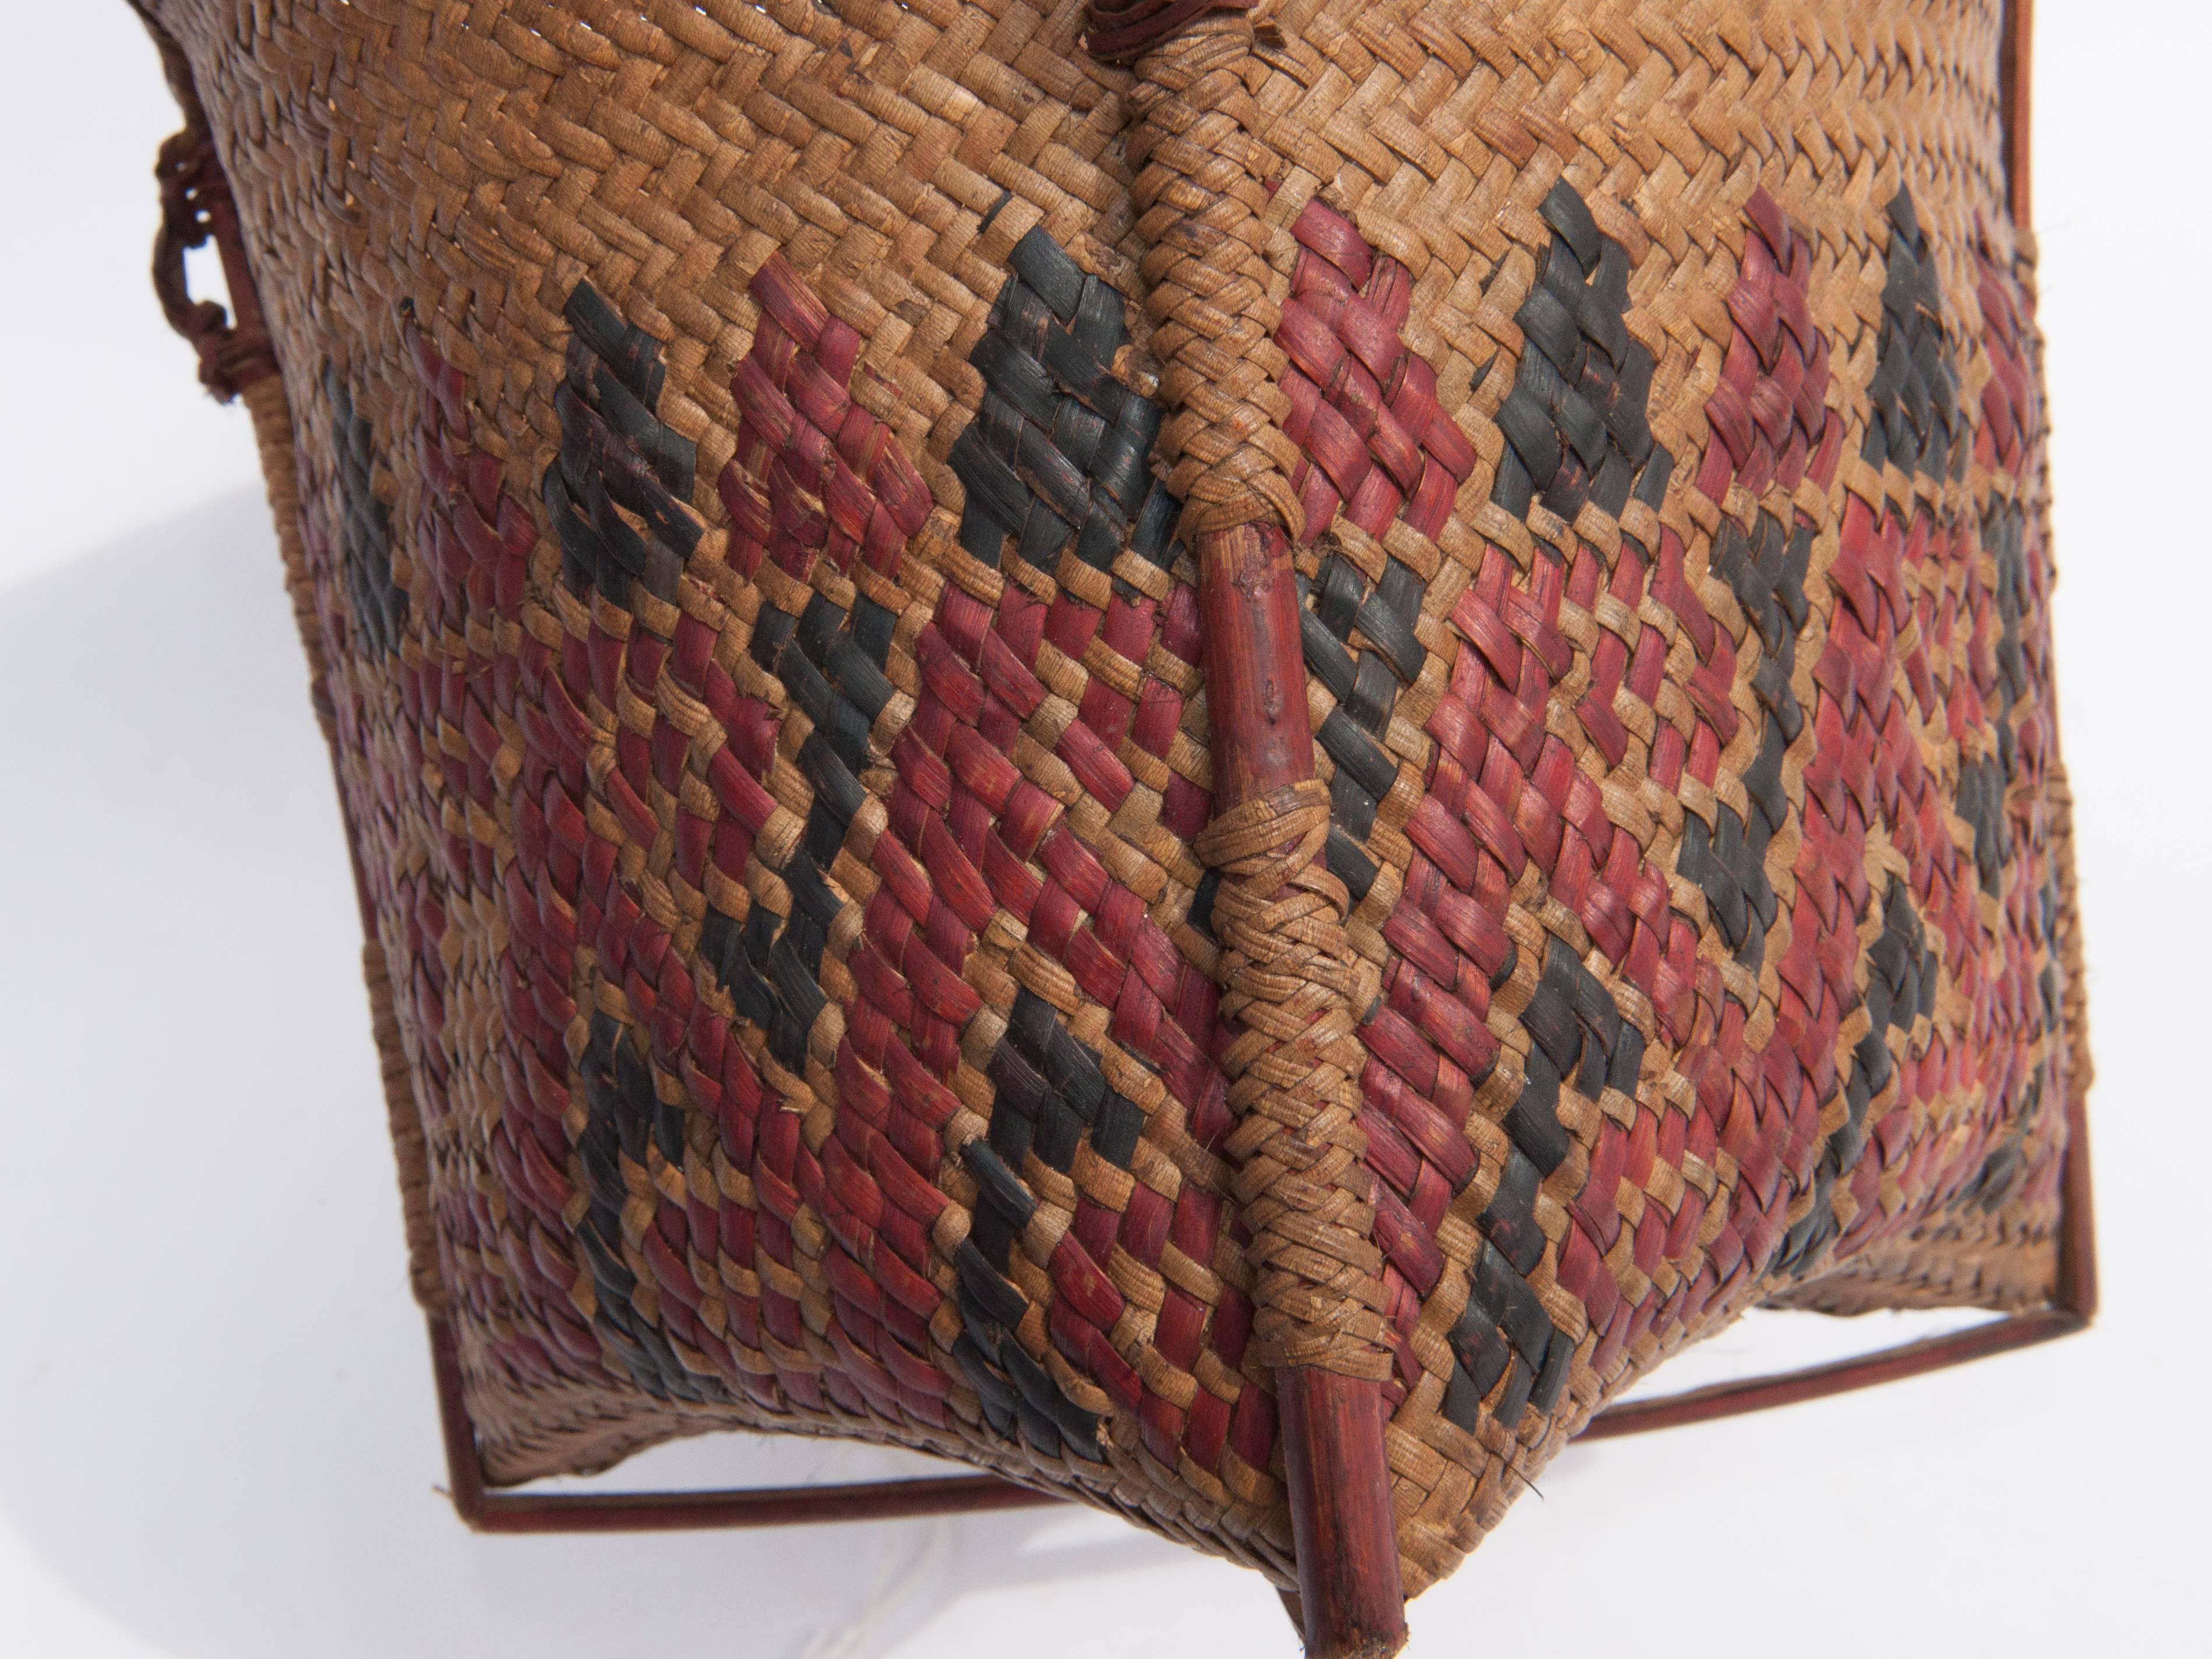 Hand-Crafted Small Vintage Collecting Basket with Colored Design, Borneo, Mid-20th Century